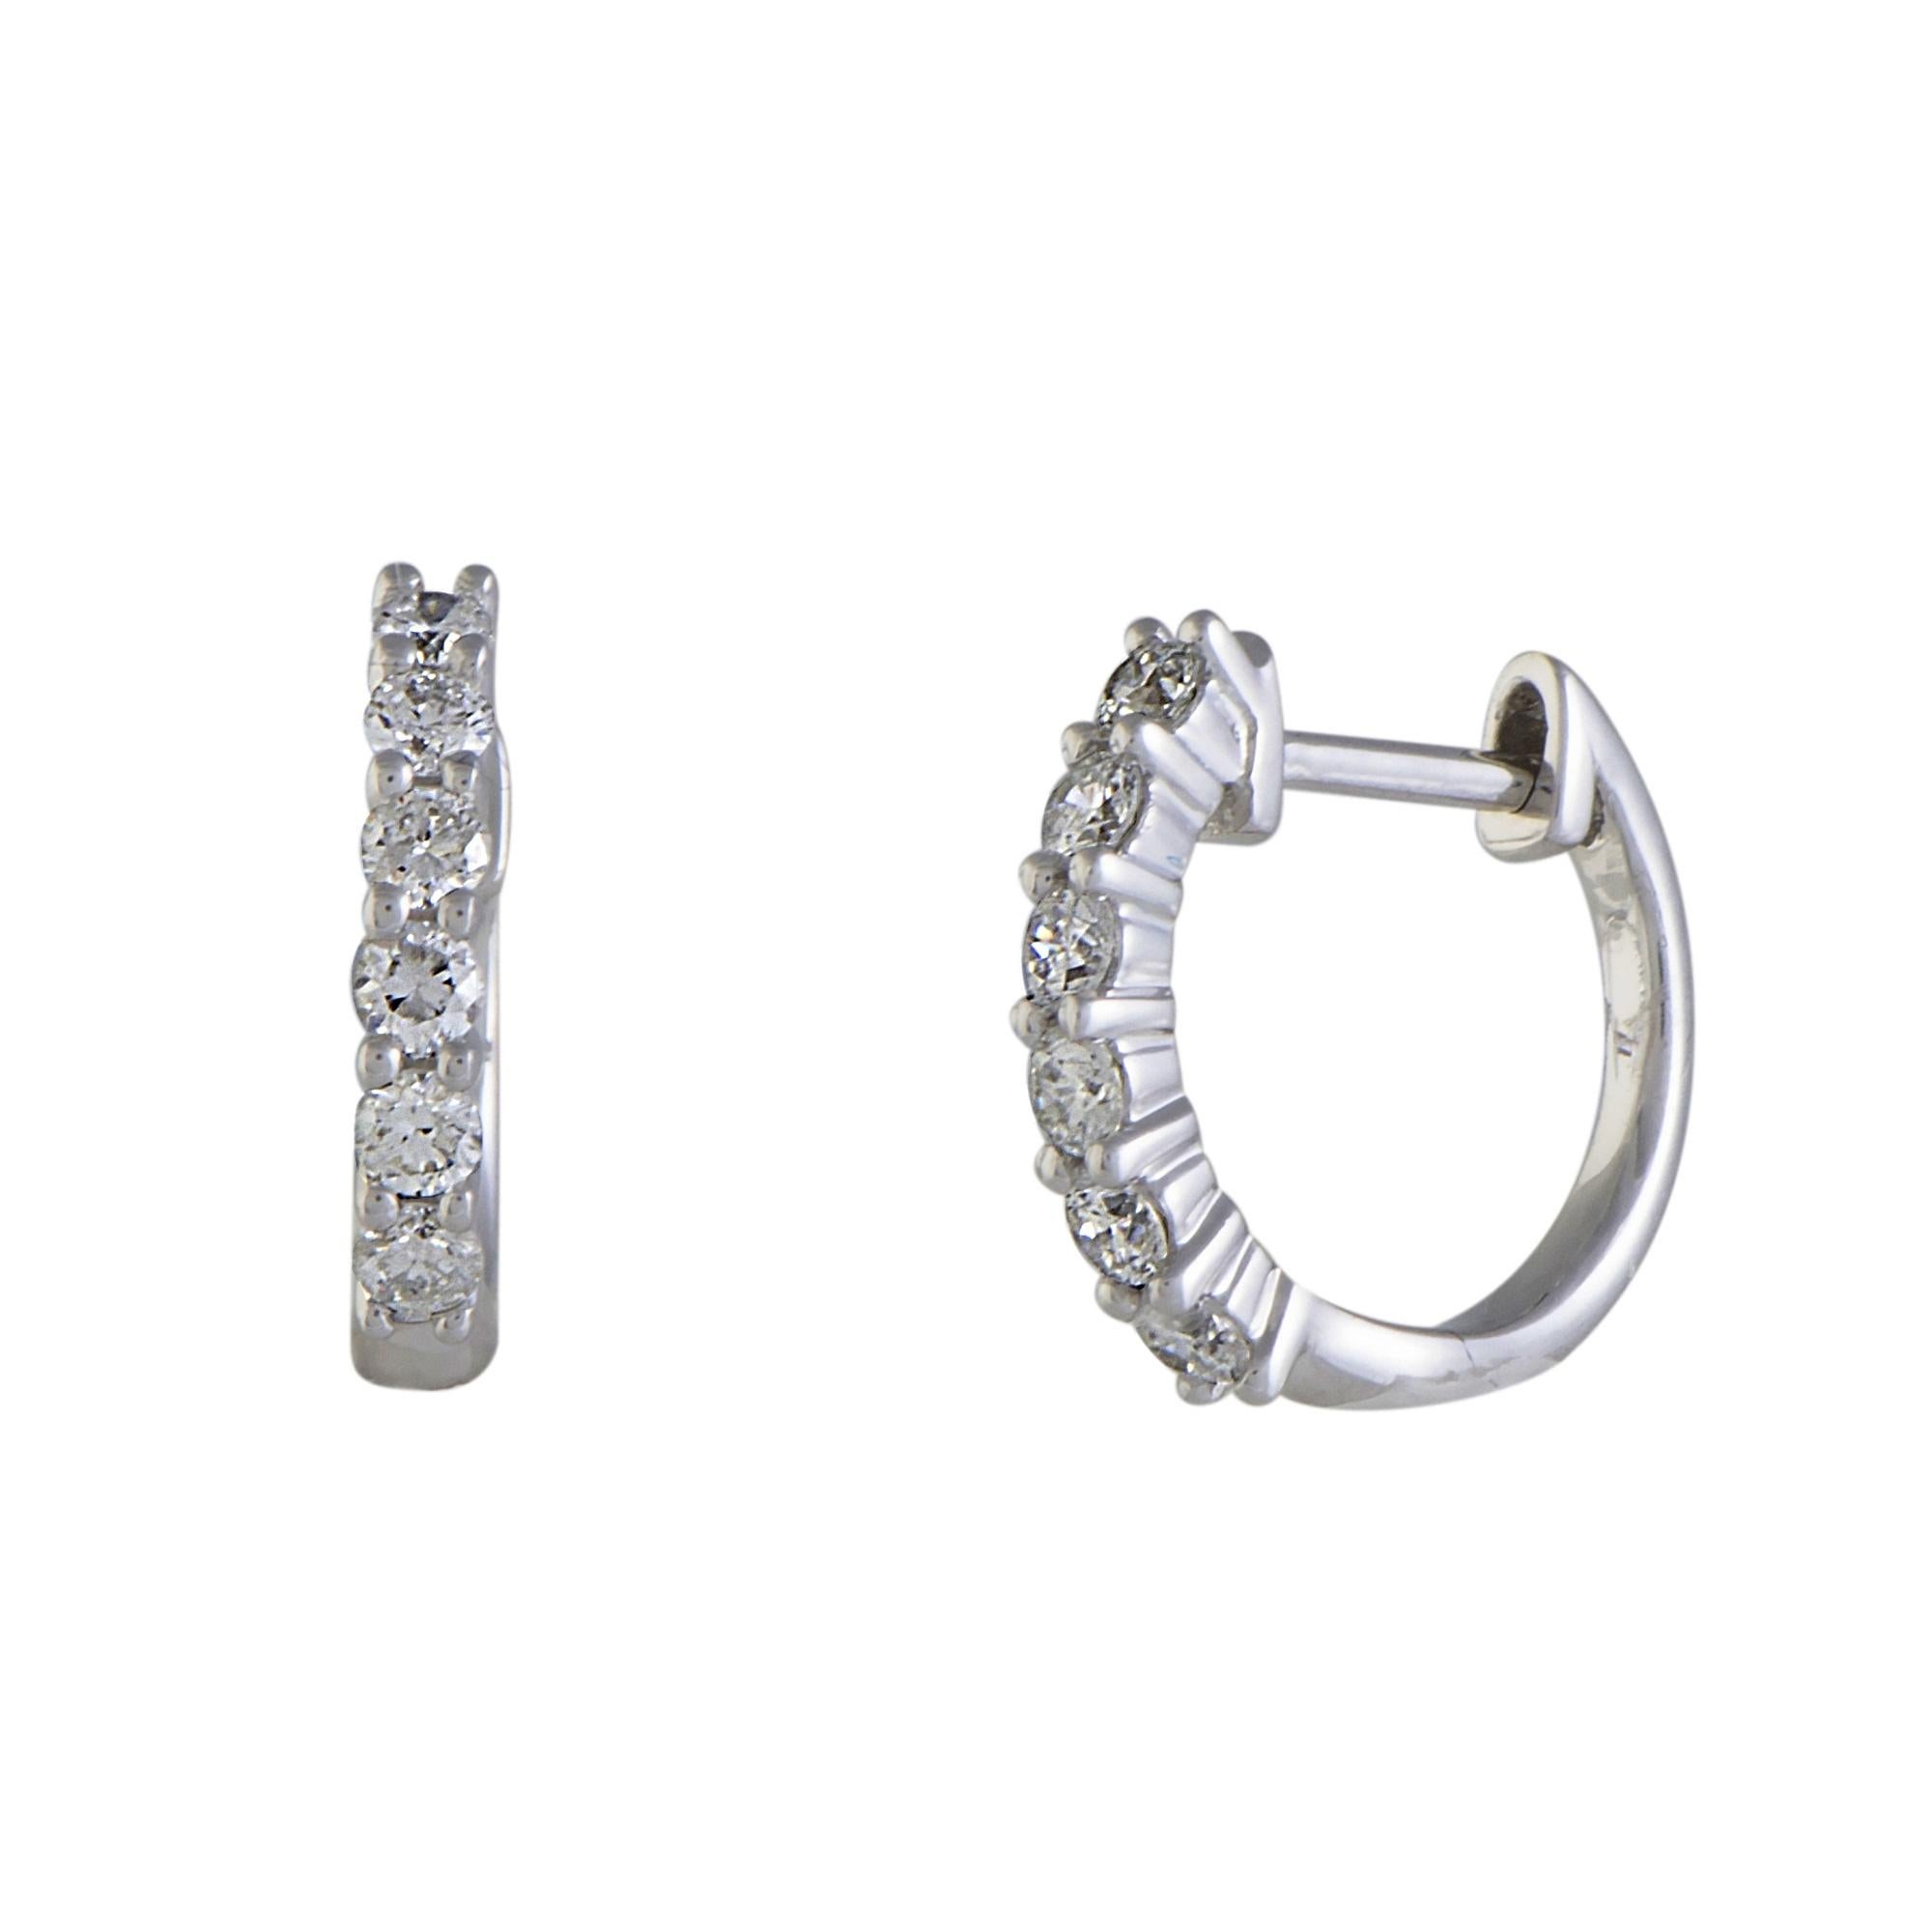 Producing a refreshing and prestigiously resplendent allure with their expertly set diamonds weighing in total 0.50 ct, these splendid earrings are made of gleaming 14K white gold for a harmoniously bright overall tone.